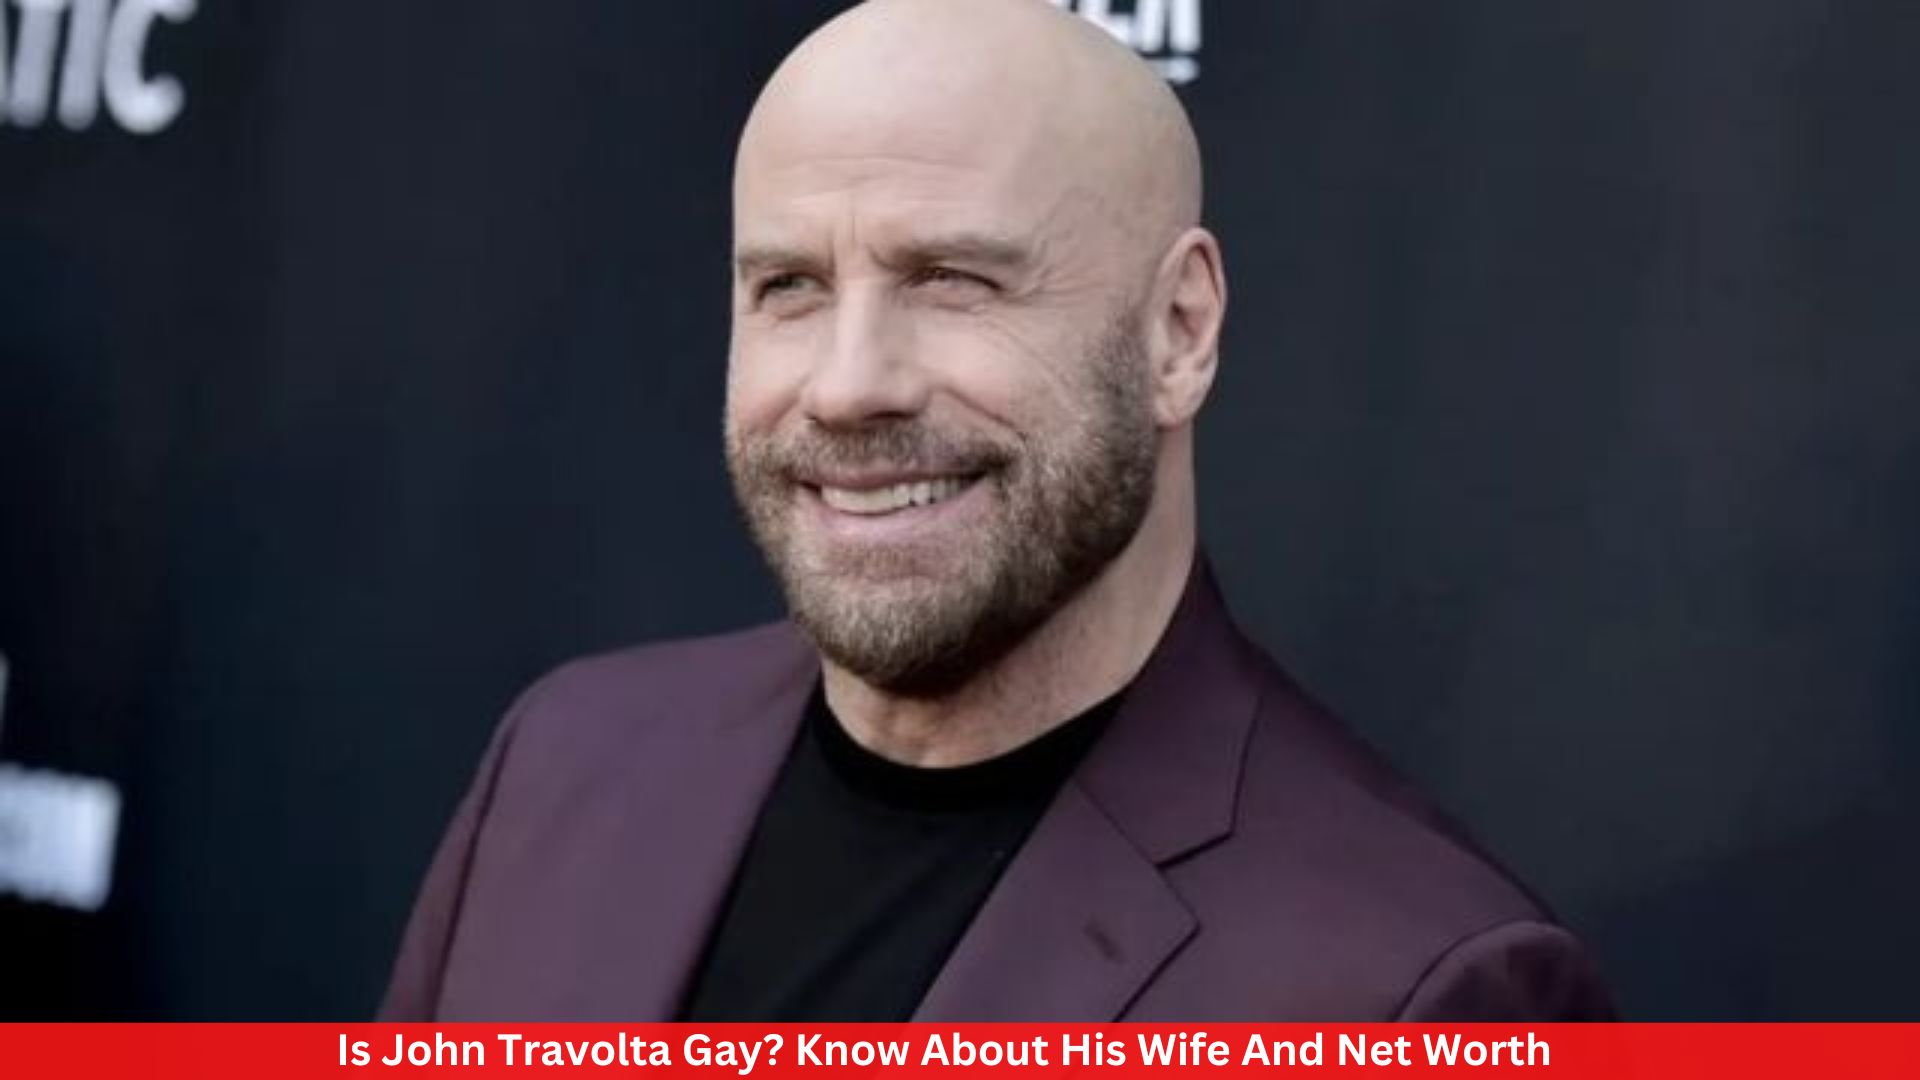 Is John Travolta Gay? Know About His Wife And Net Worth